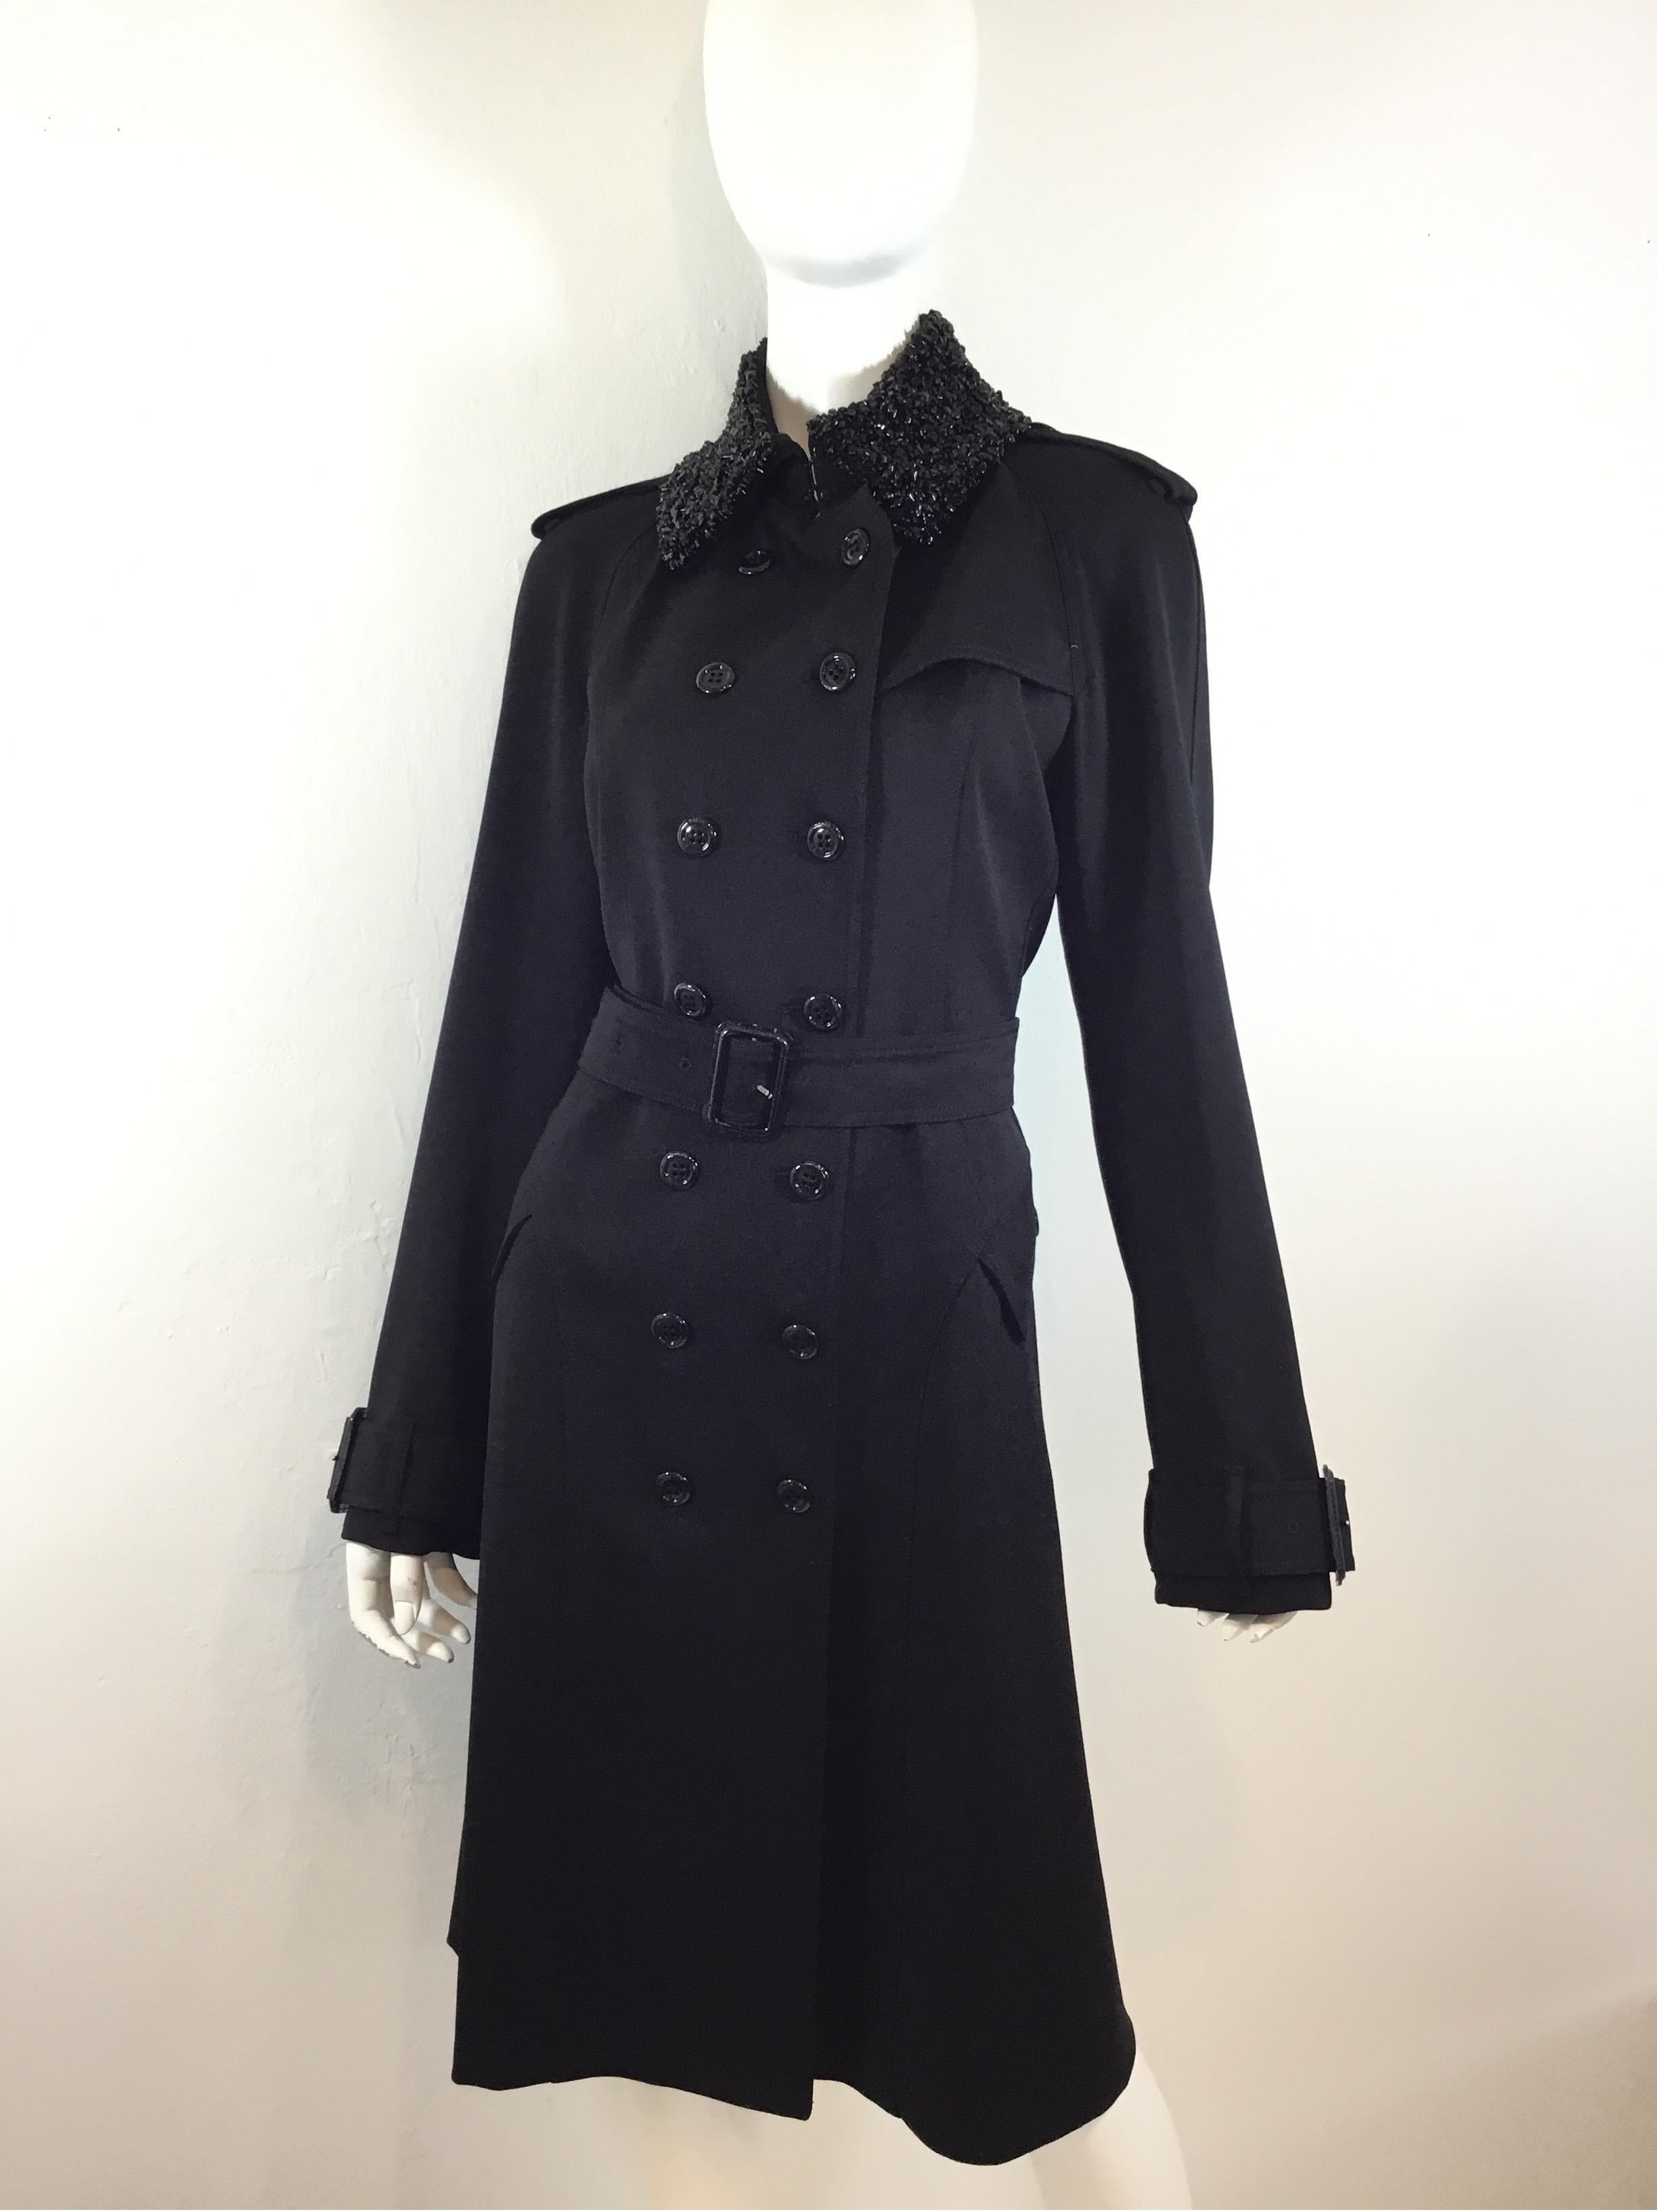 Burberry black gabardine trench coat features button fastenings, waist belt, and a beaded collar. Coat is in excellent like-new condition. 100% virgin wool. Labeled size US 12/ IT 46, made in Italy.

Measurements: Bust 41'', waist 38'', length 44'',